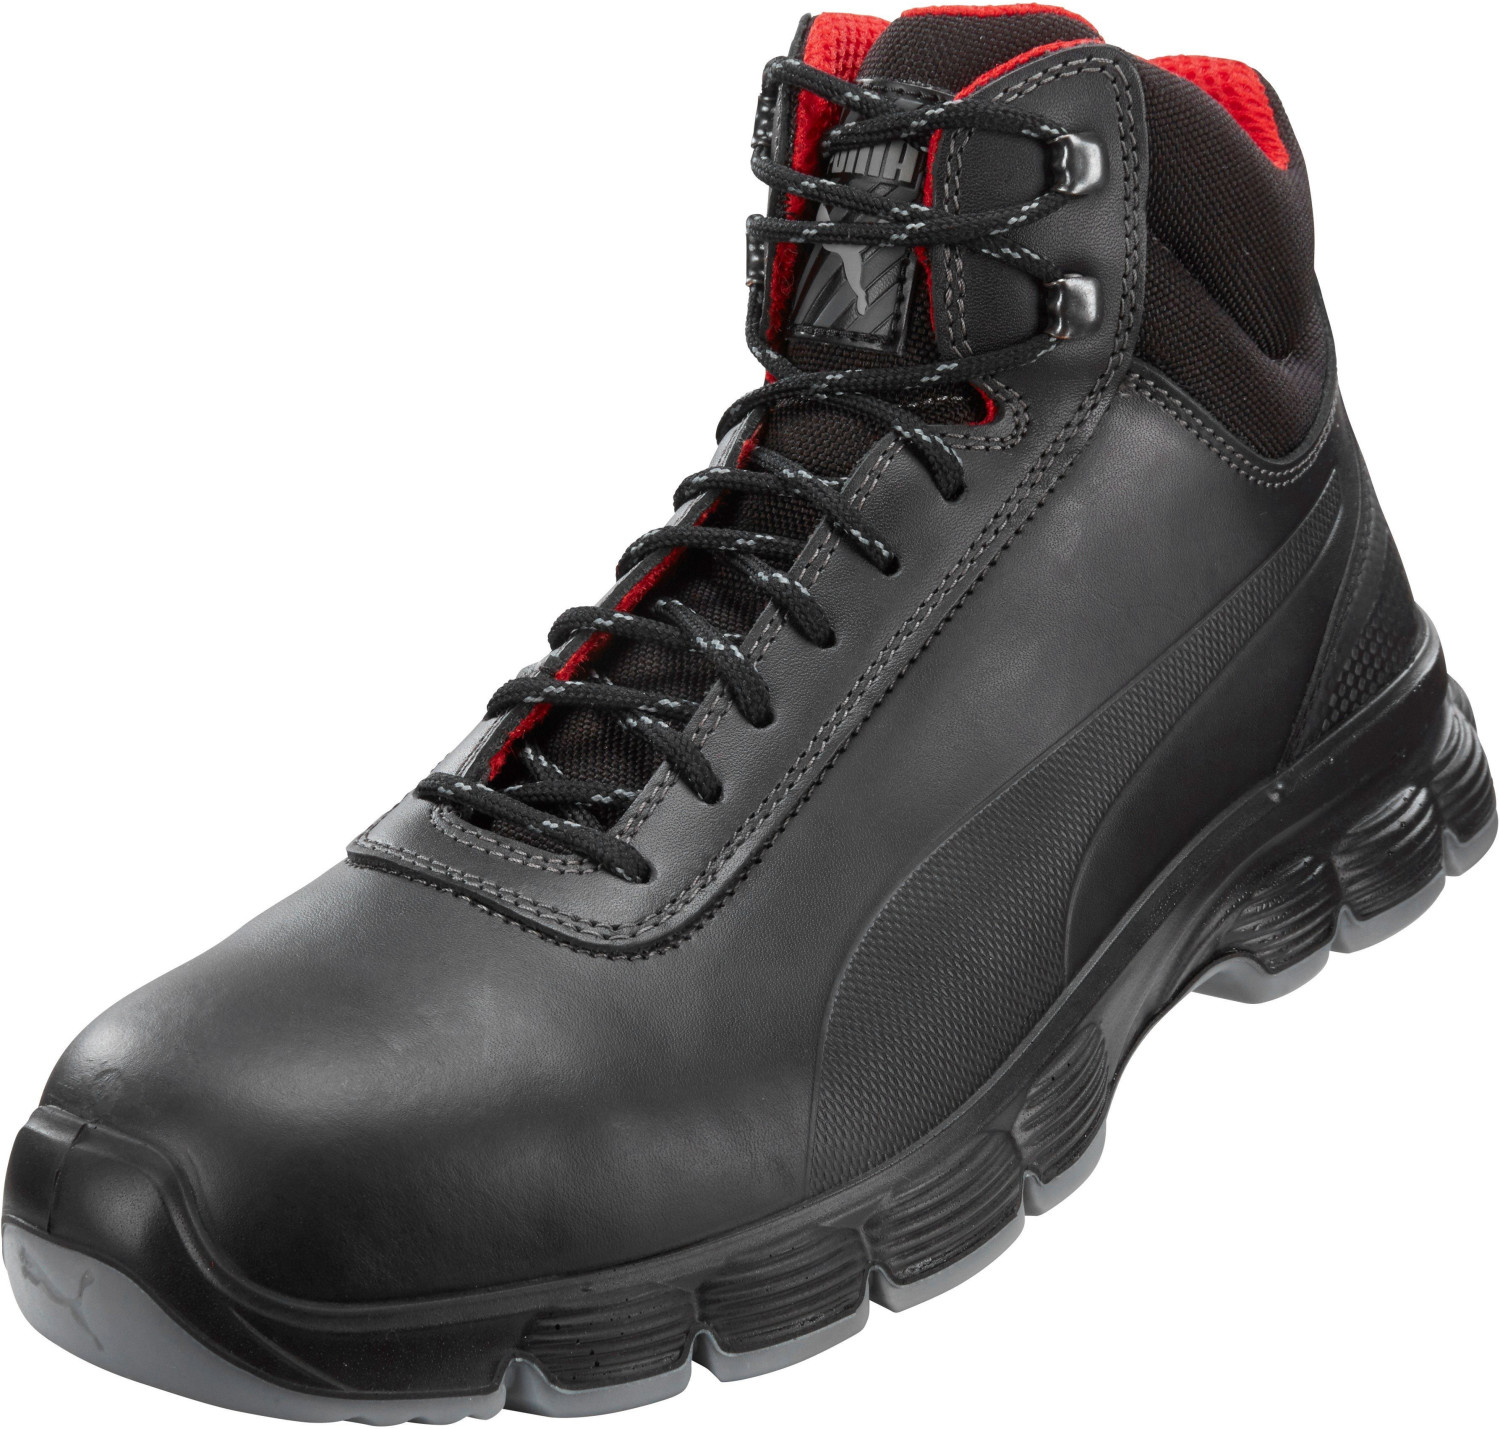 Buy Puma Safety Pioneer Mid (630101) £84.95 from Best – on (Today) black Deals